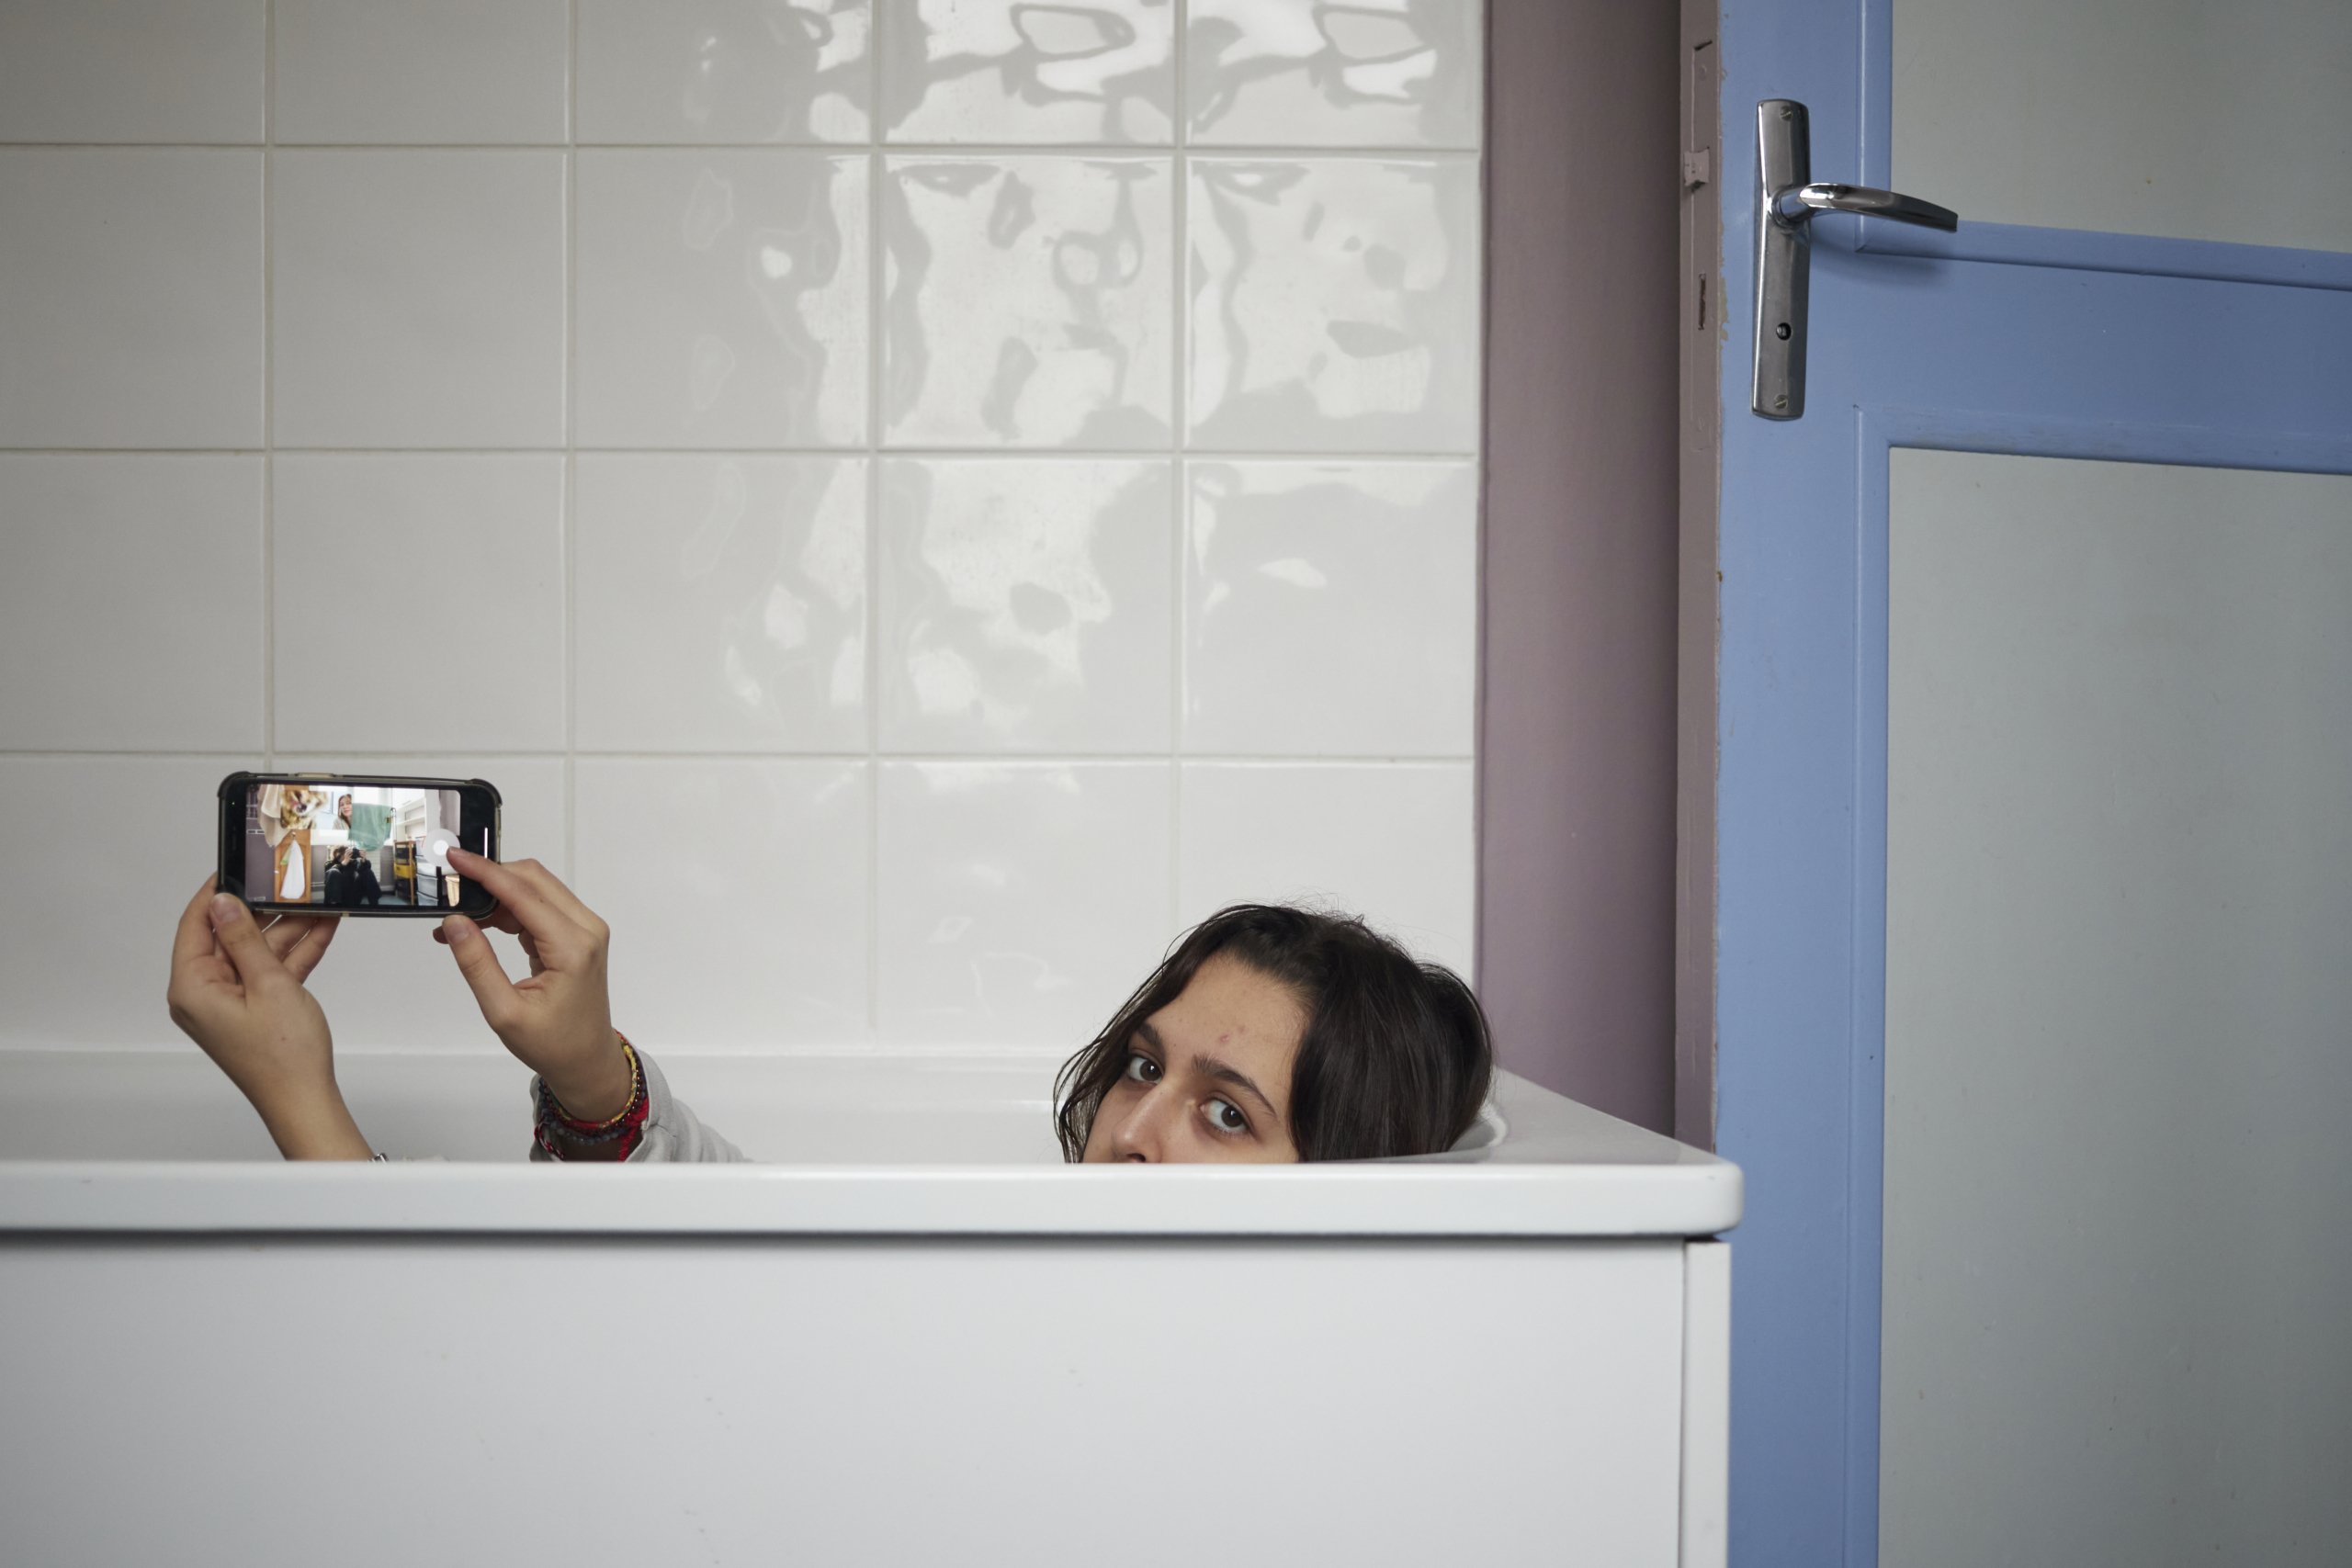 A woman laying in an empty bathtub, shows her phone screen to the photographer.